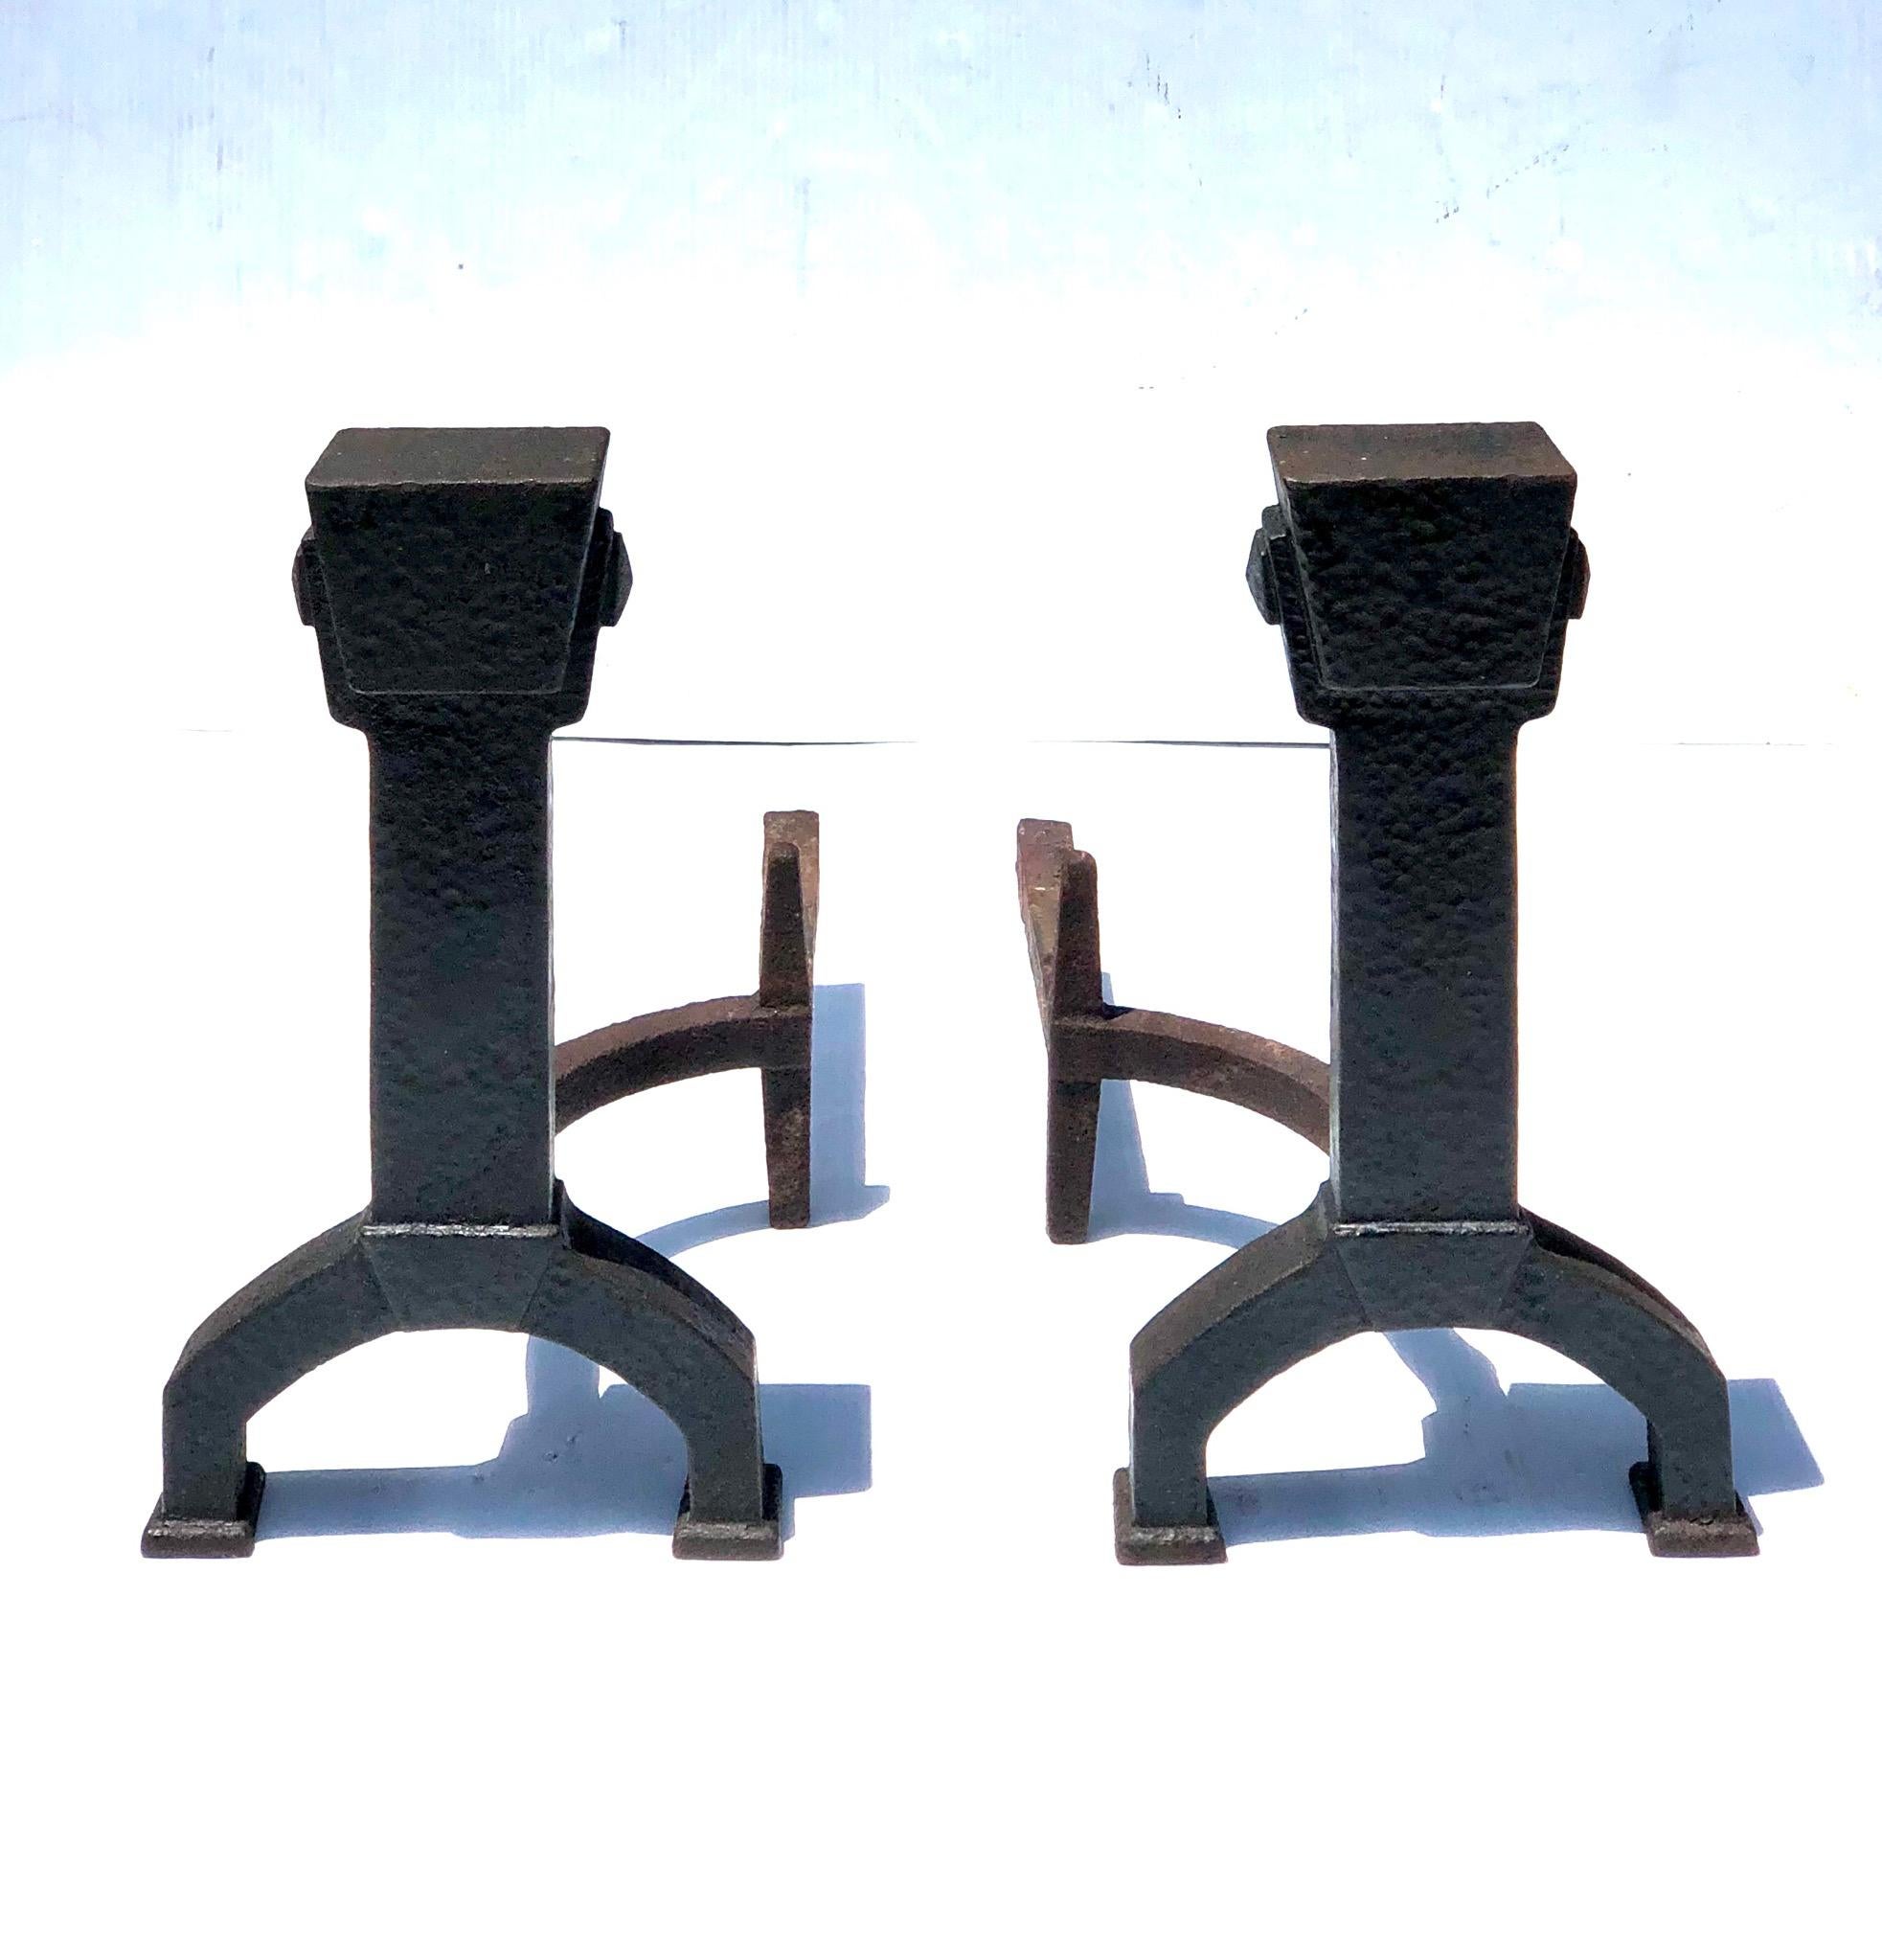 Pair of American Arts & Crafts hammered iron andirons with knockers, circa 1900s.